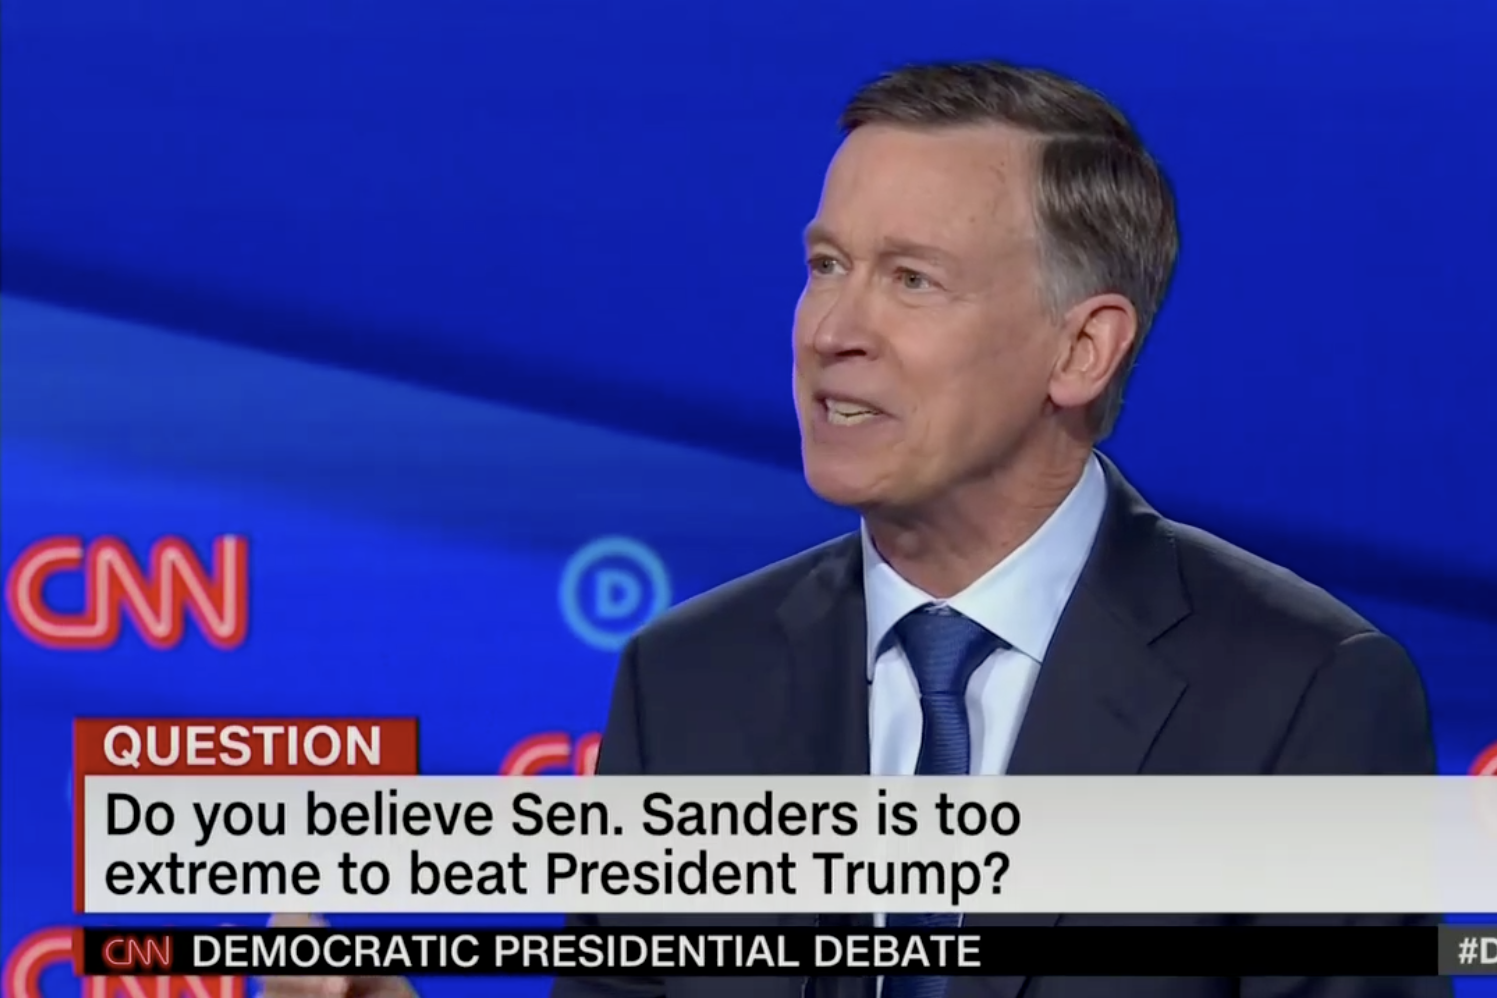 In this screengrab from CNN, John Hickenlooper debates. The banner reads: "Do you believe Sen. Sanders is too extreme to beat President Trump?"